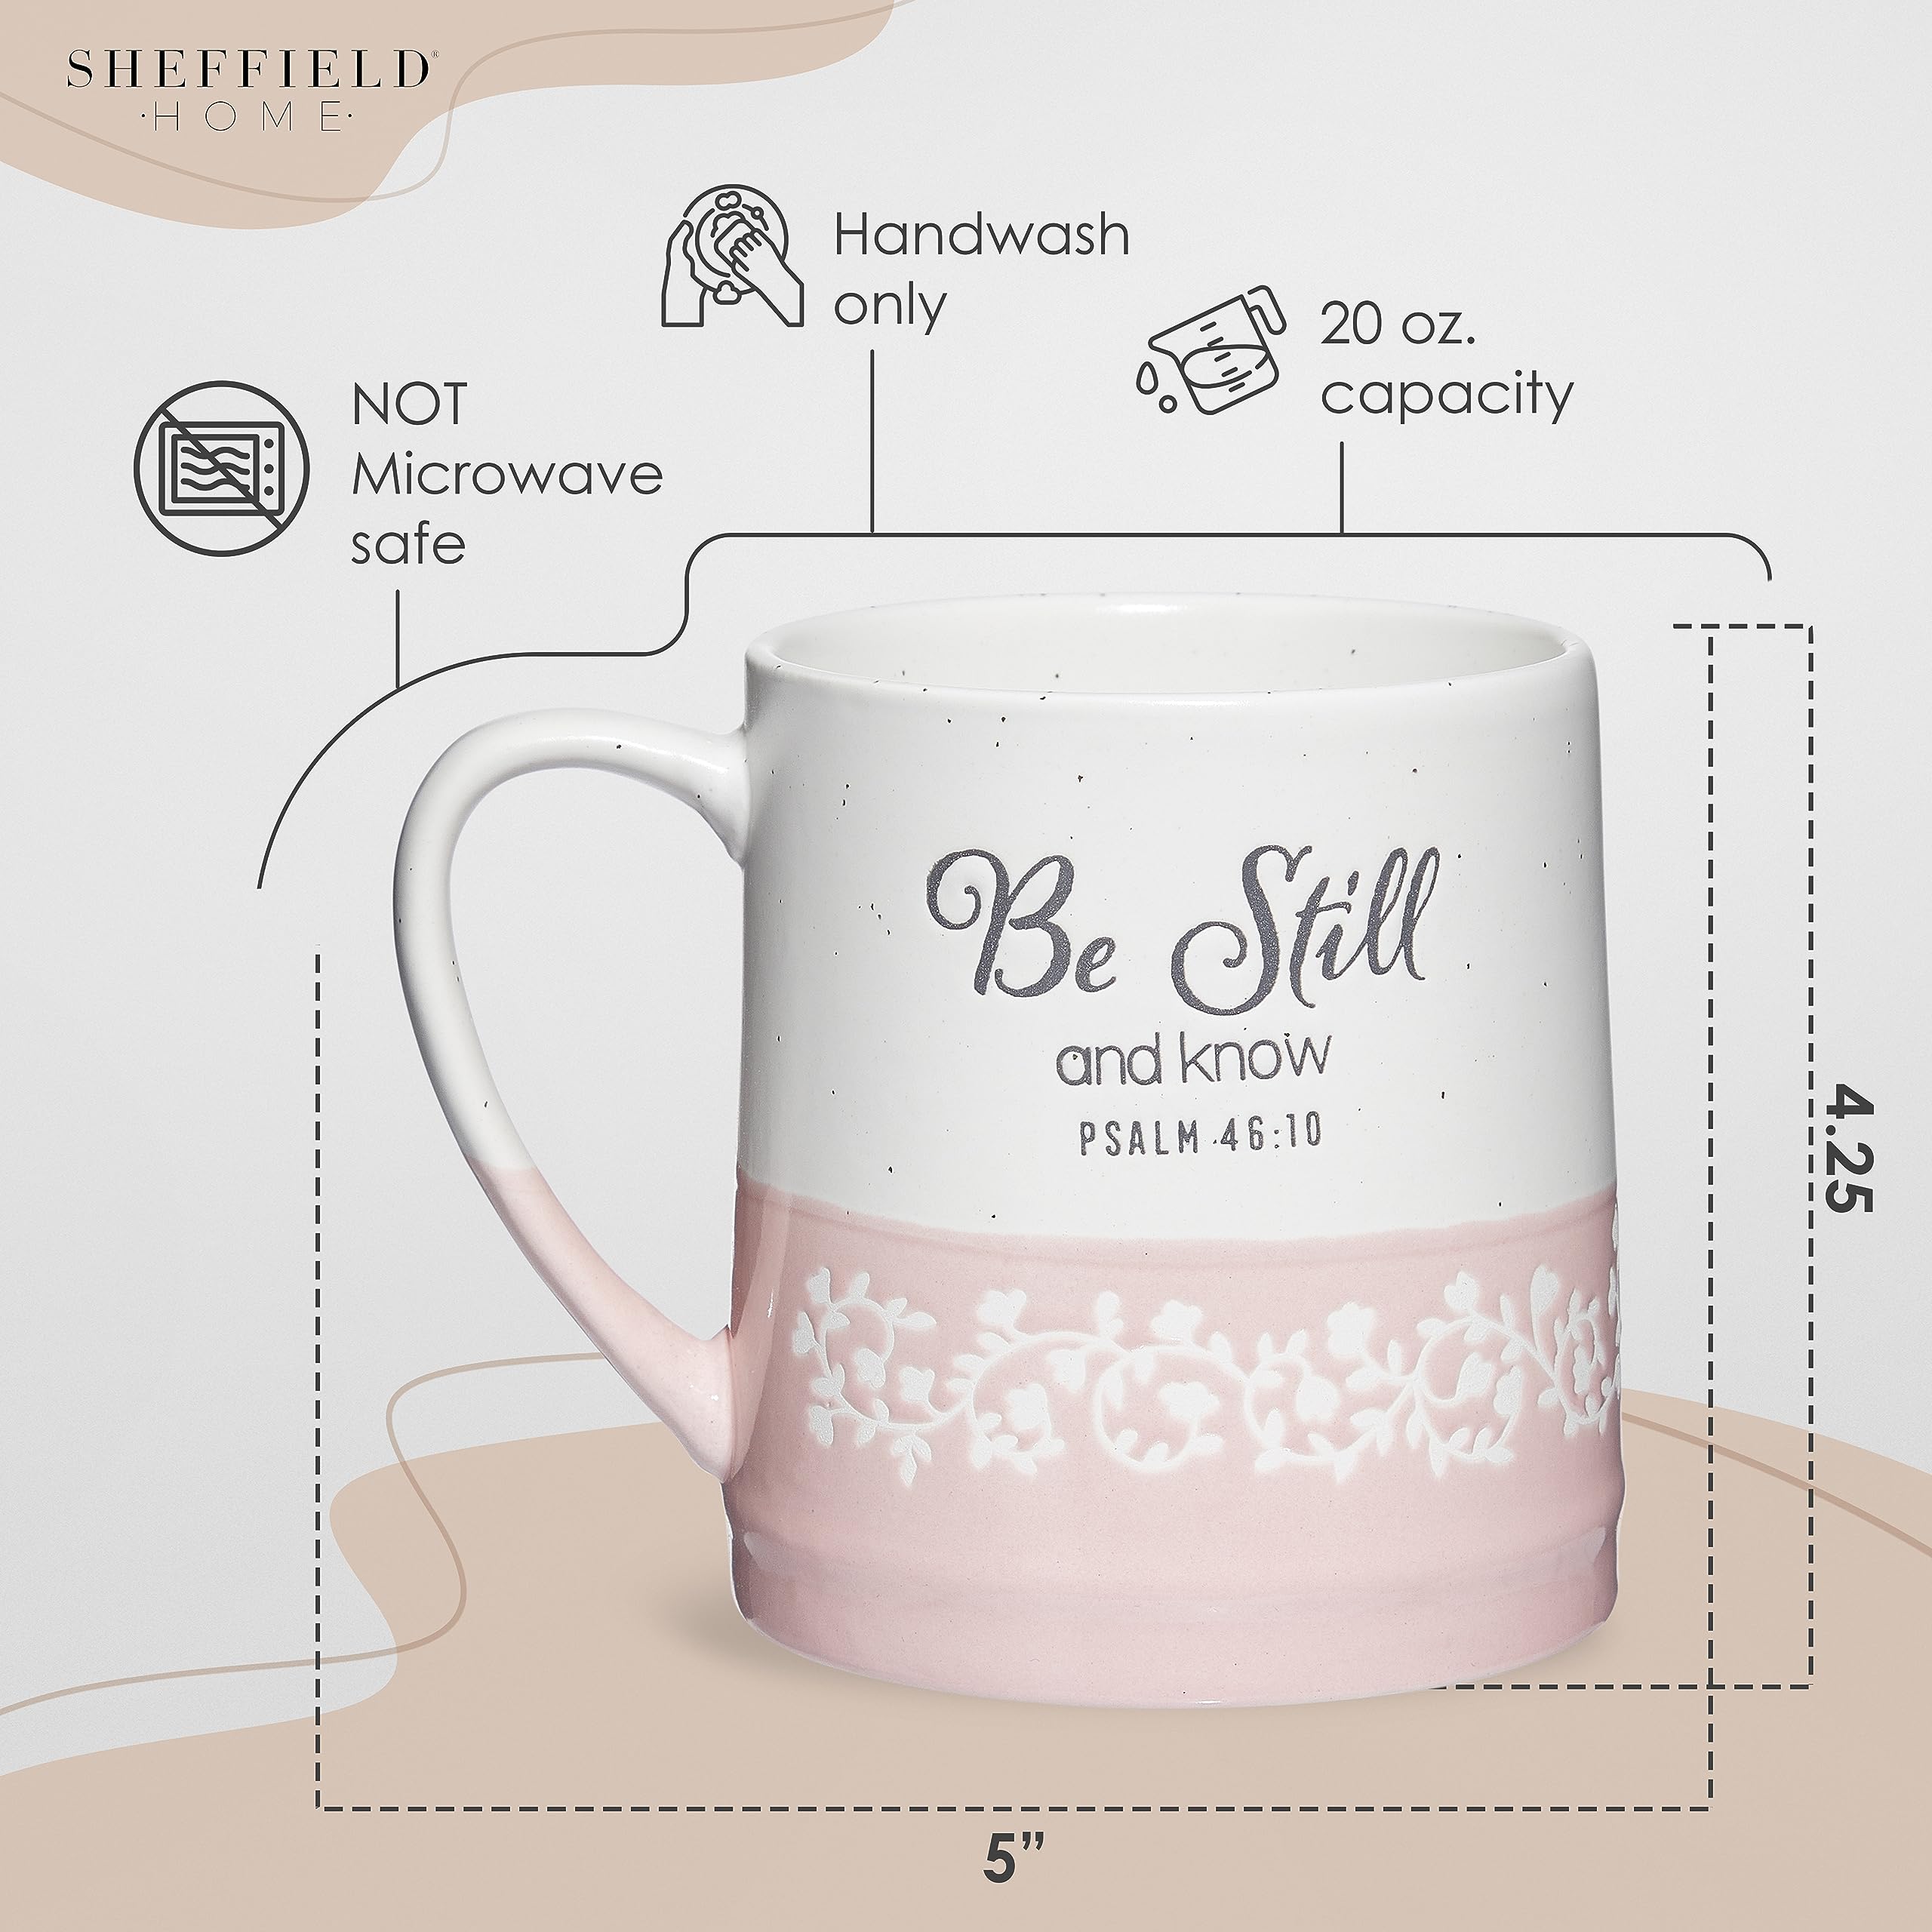 Sheffield Home Religious Coffee Mugs - Stoneware Motivational Bible Coffee Mugs For Women And Men - Inspirational Mugs And Cups, Mugs For Tea, Latte, And Hot Chocolate  - Like New